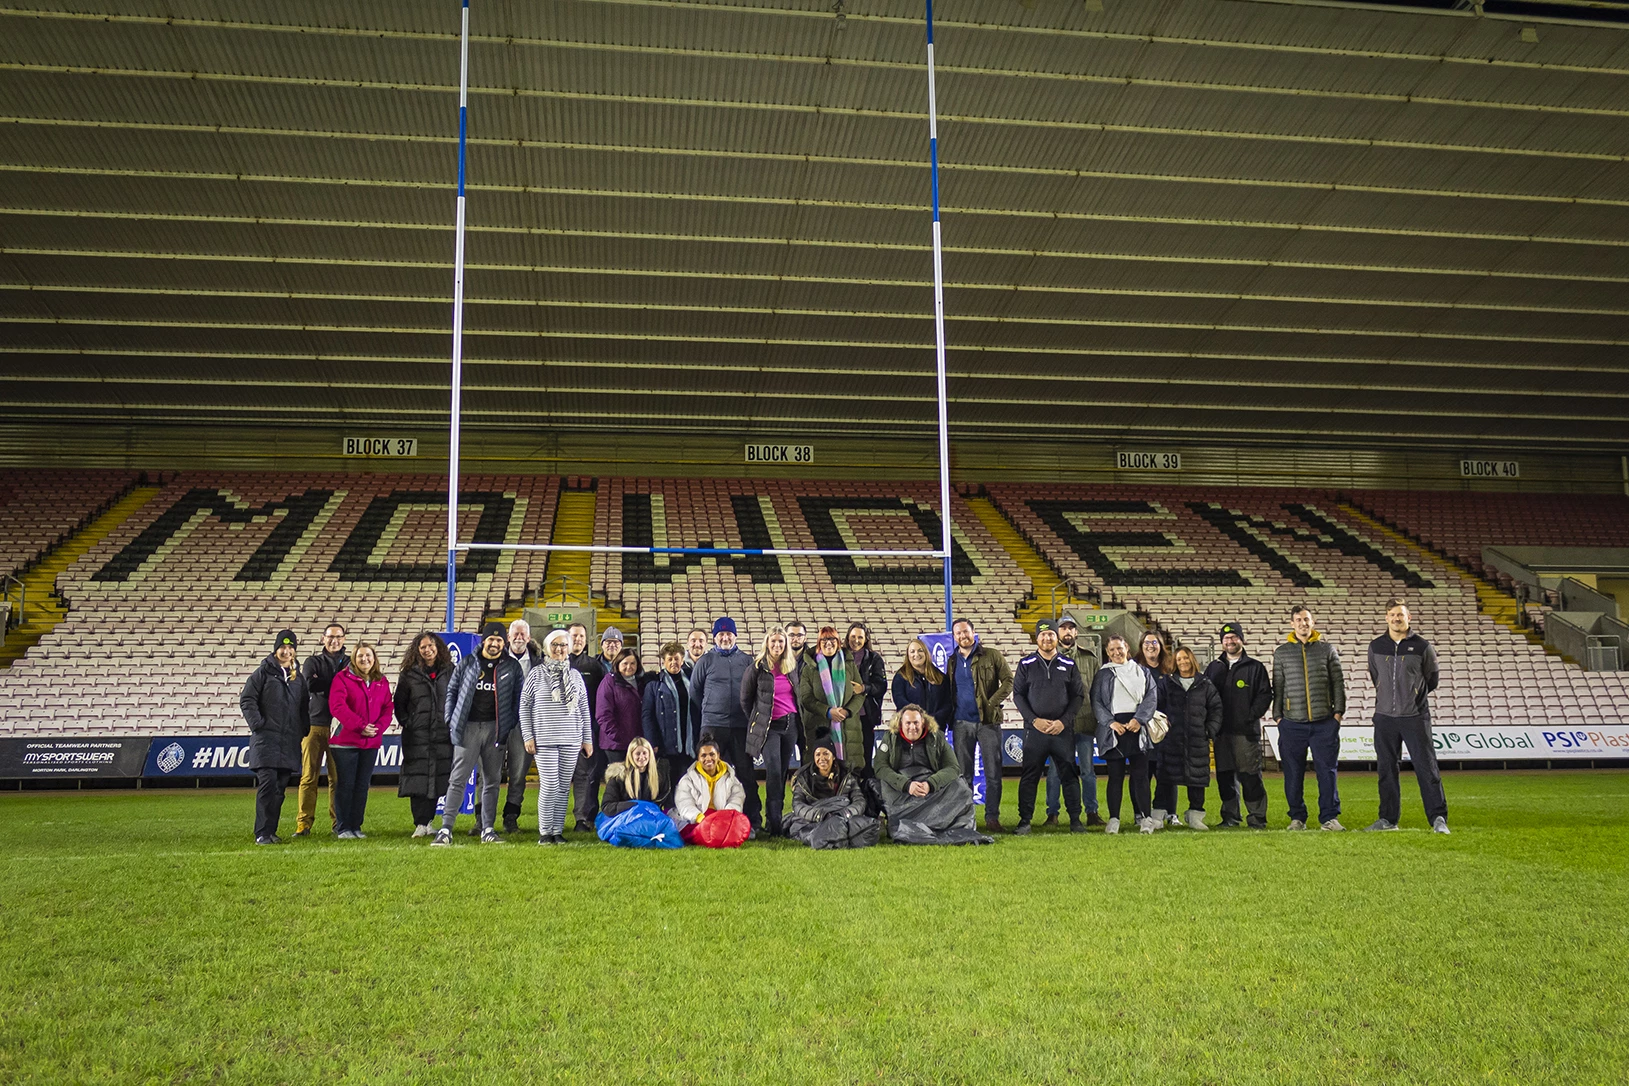 Tees Valley business leaders ready to brave the cold for a night to raise awareness of homelessness